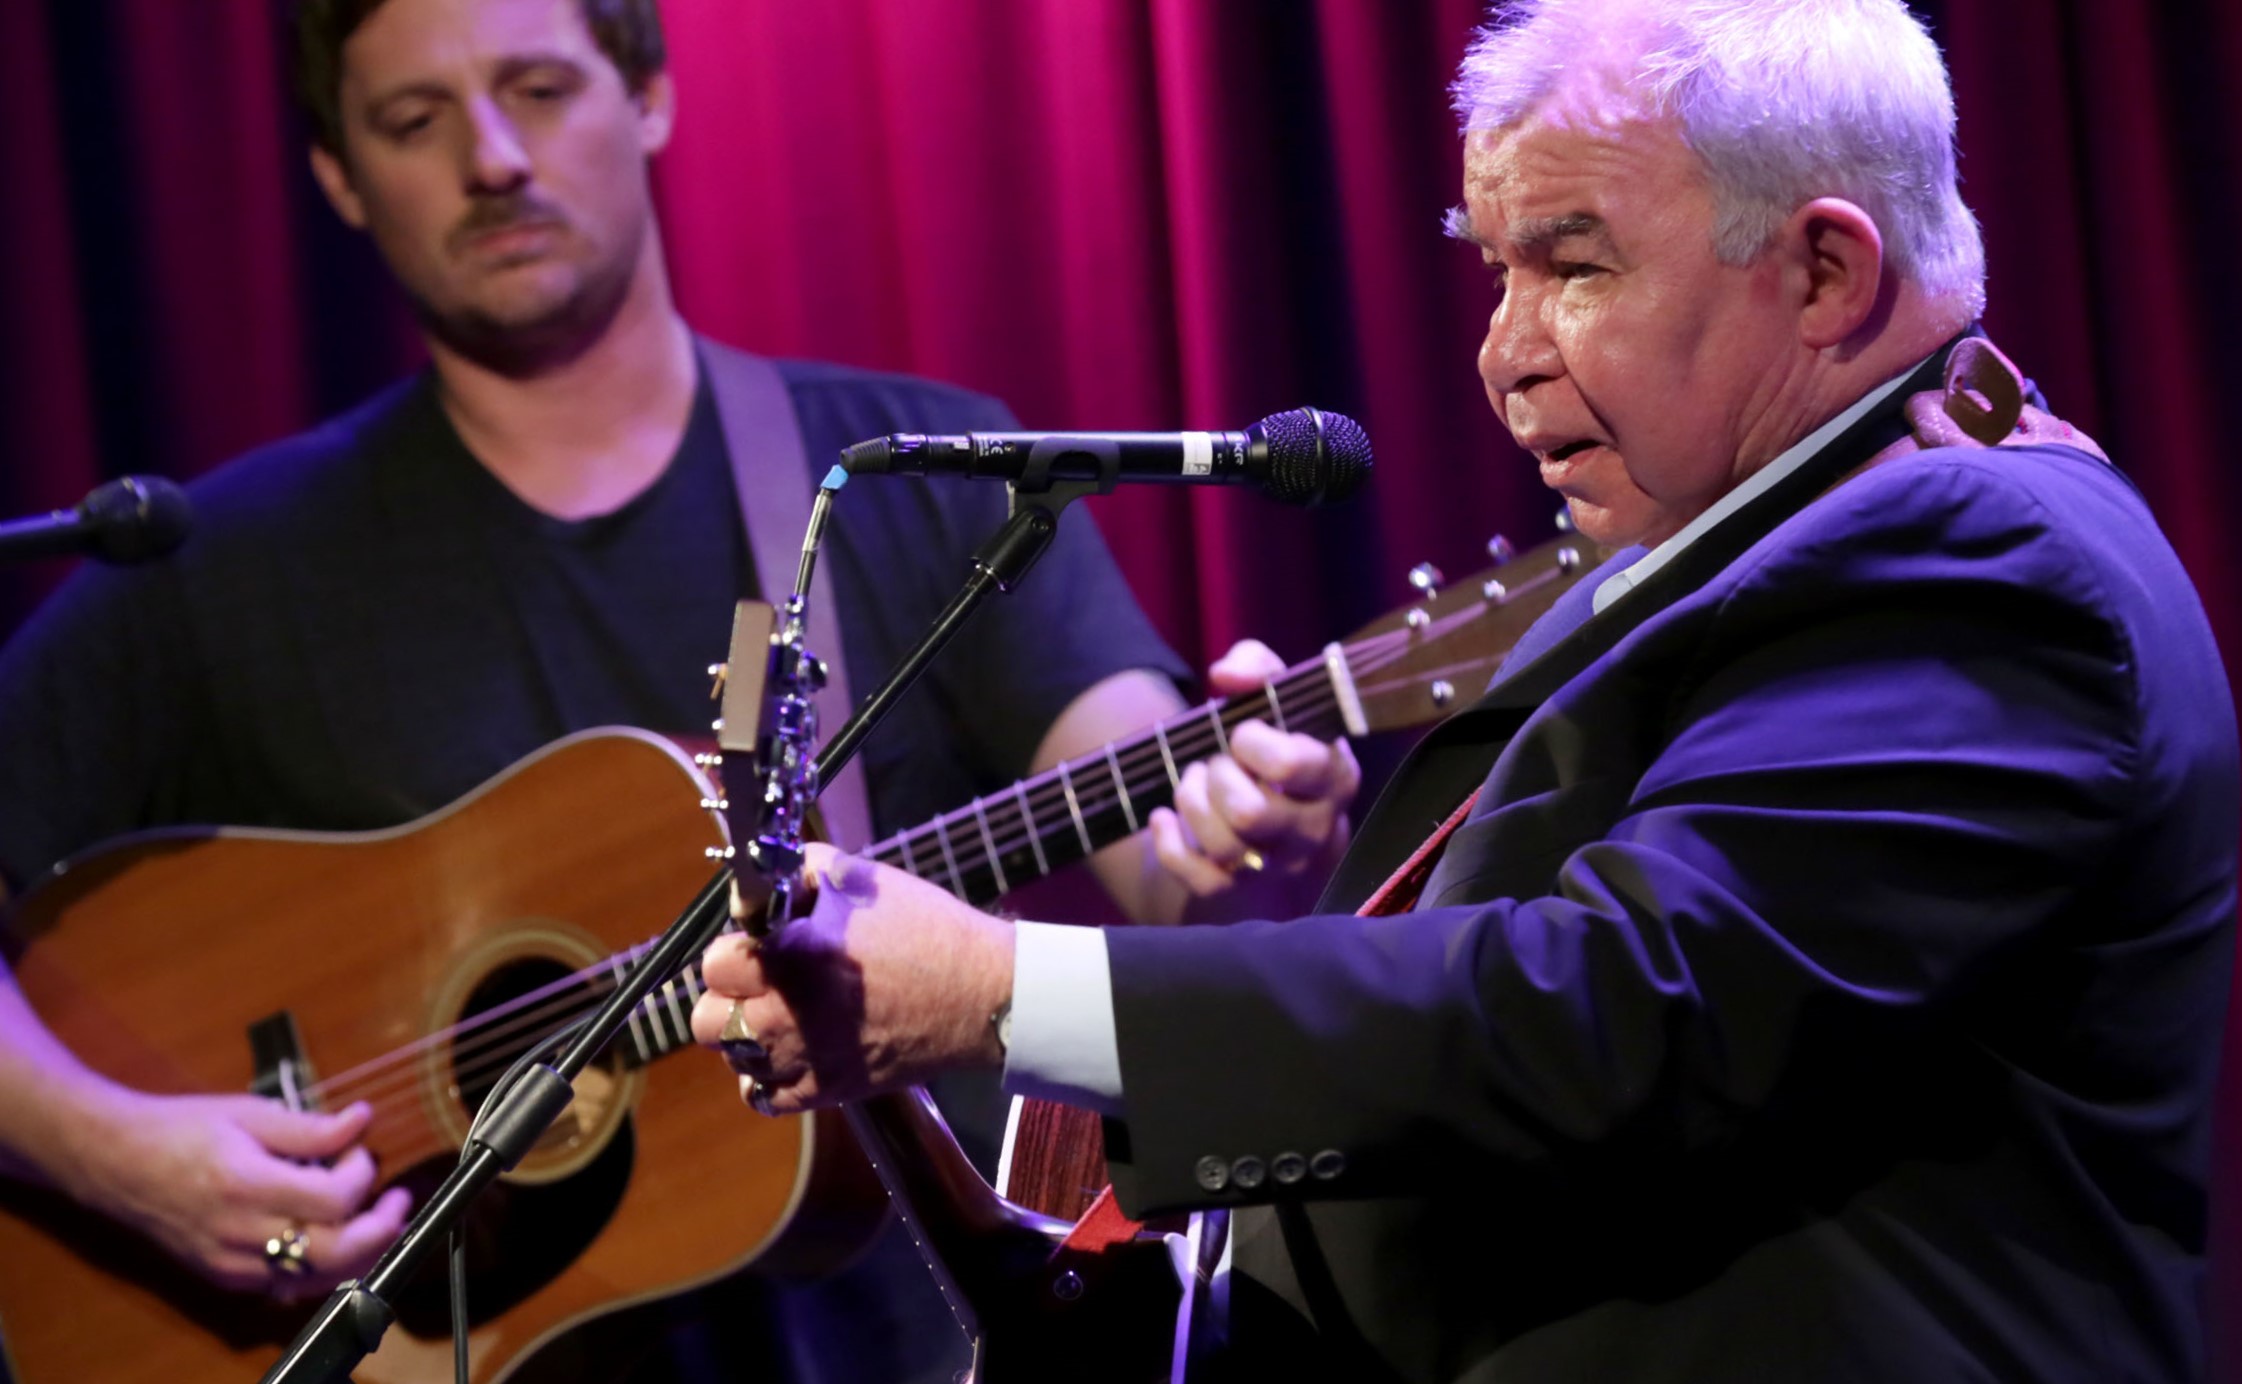 A Few Moments with John Prine & Sturgill Simpson at “The Speed of The Sound of Loneliness”